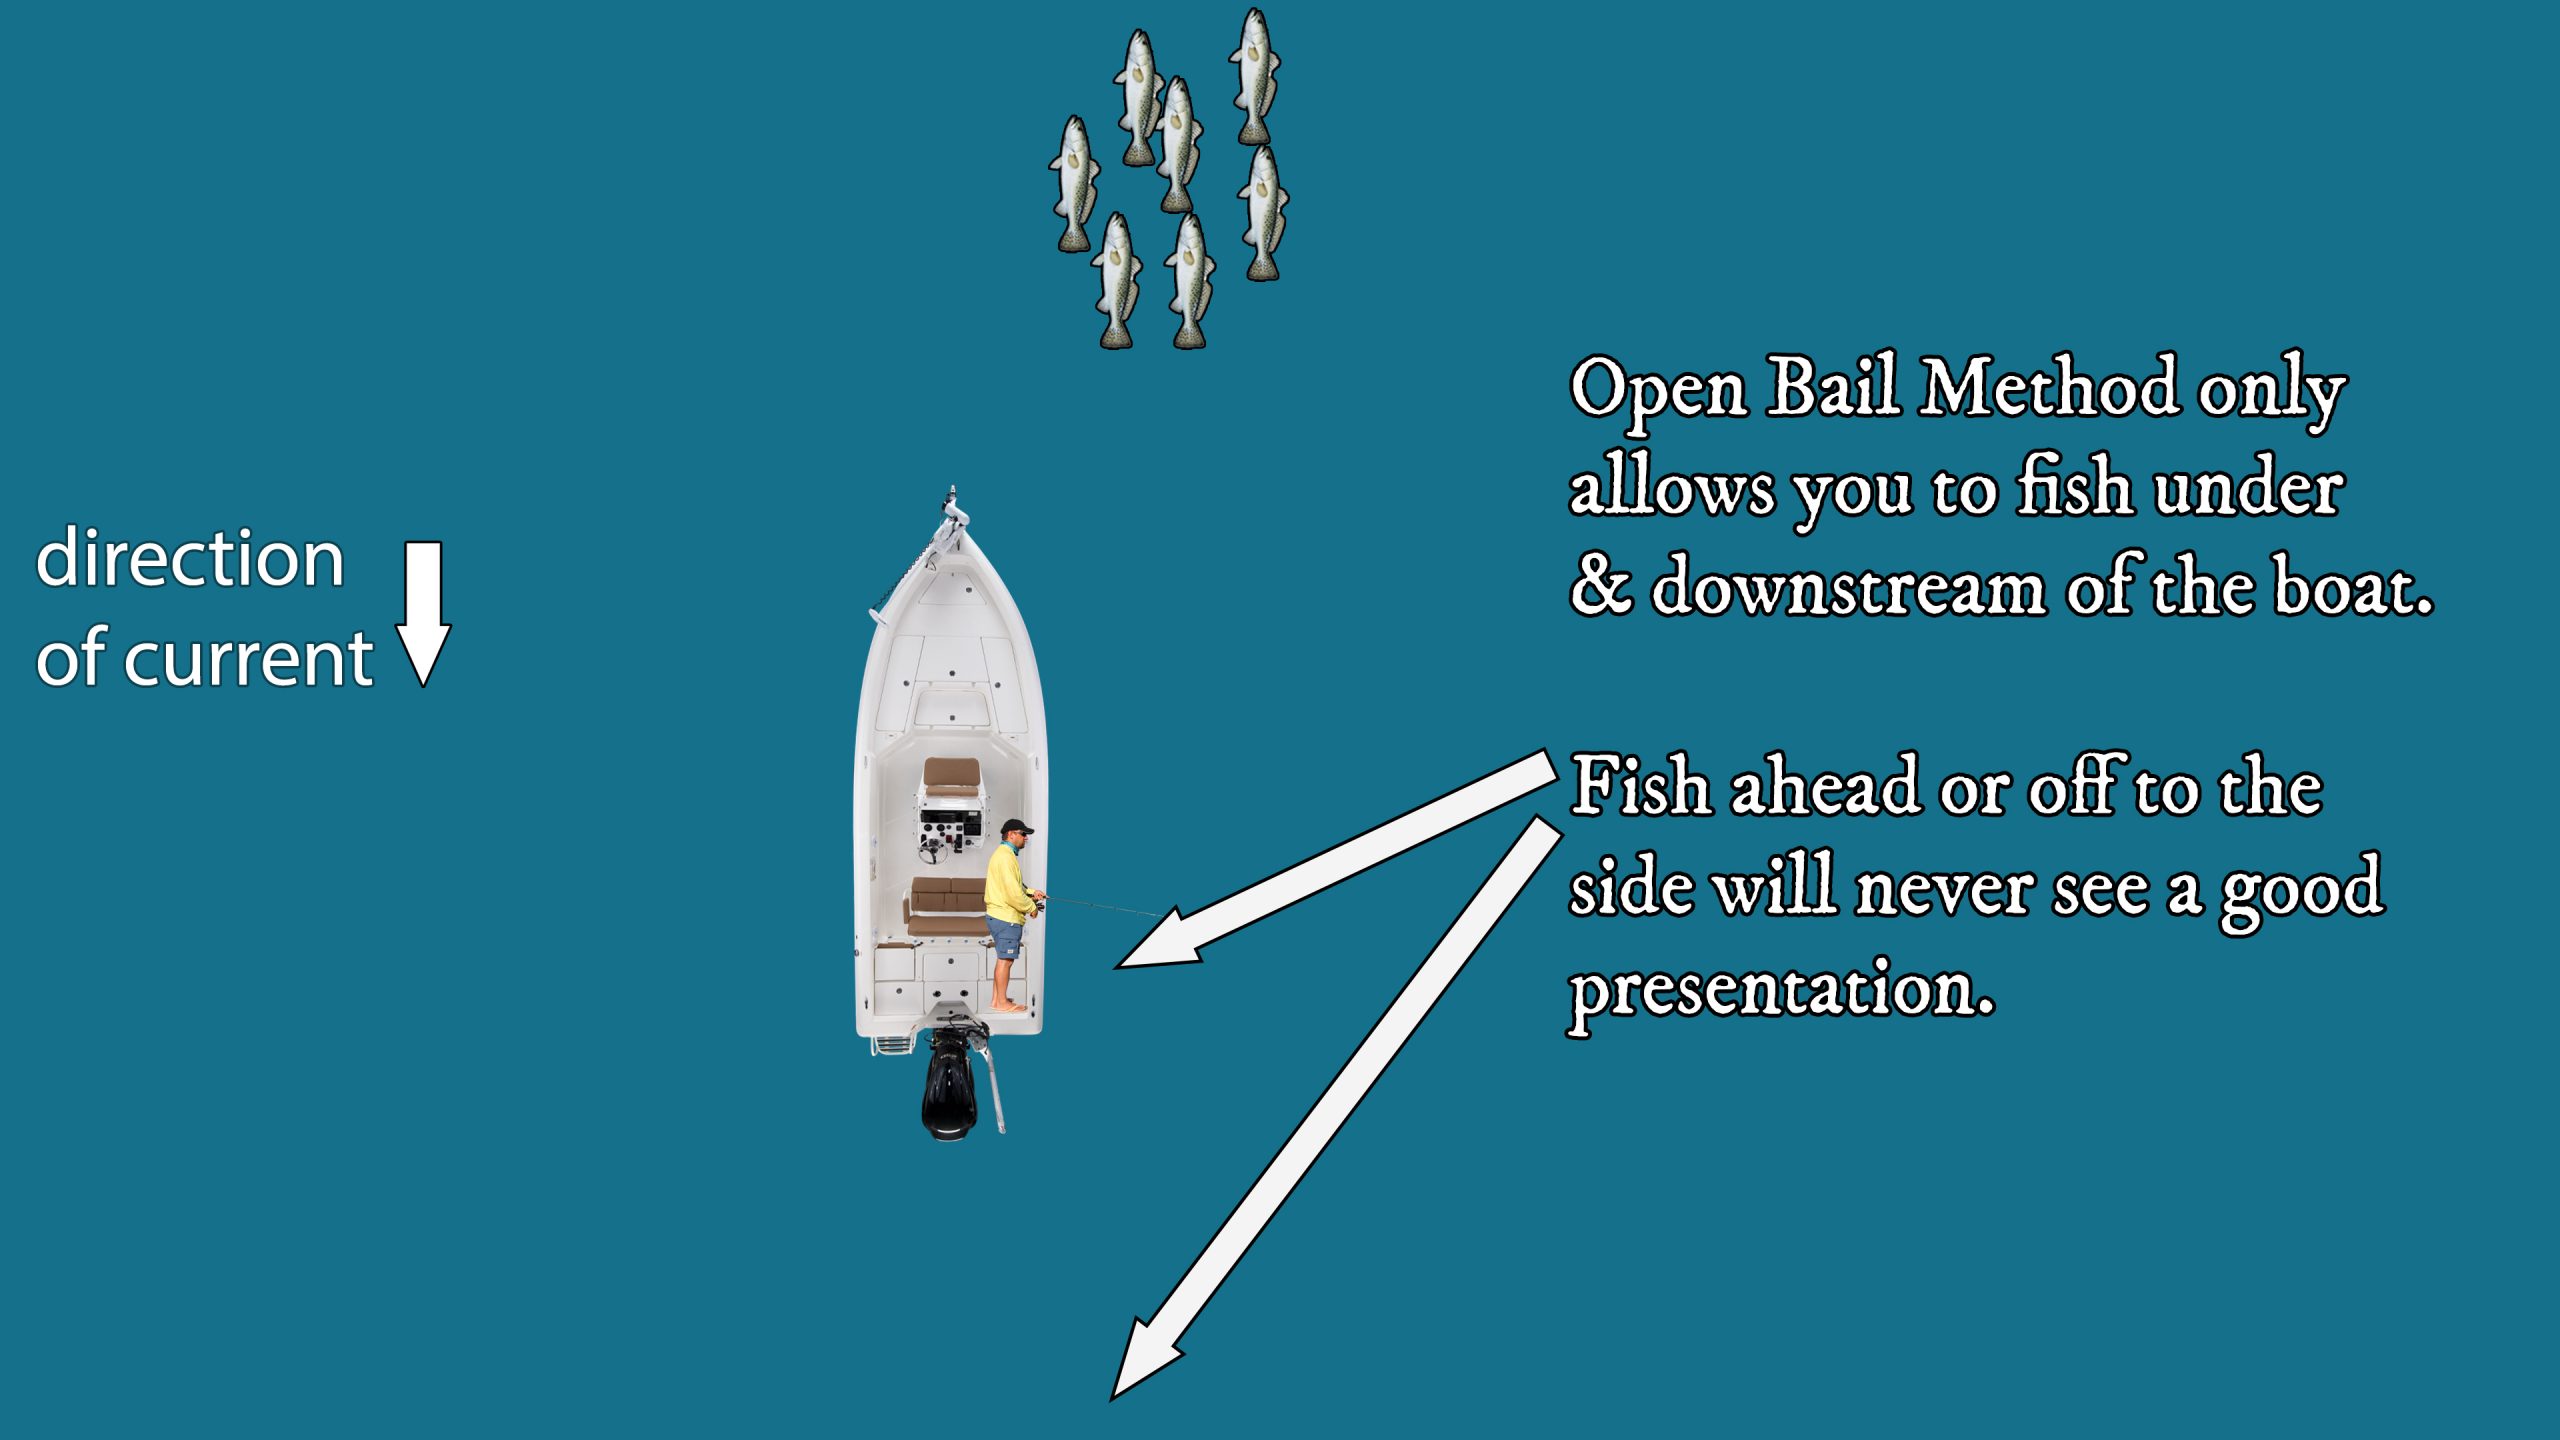 Open Bail Method Fails to catch speckled trout deep